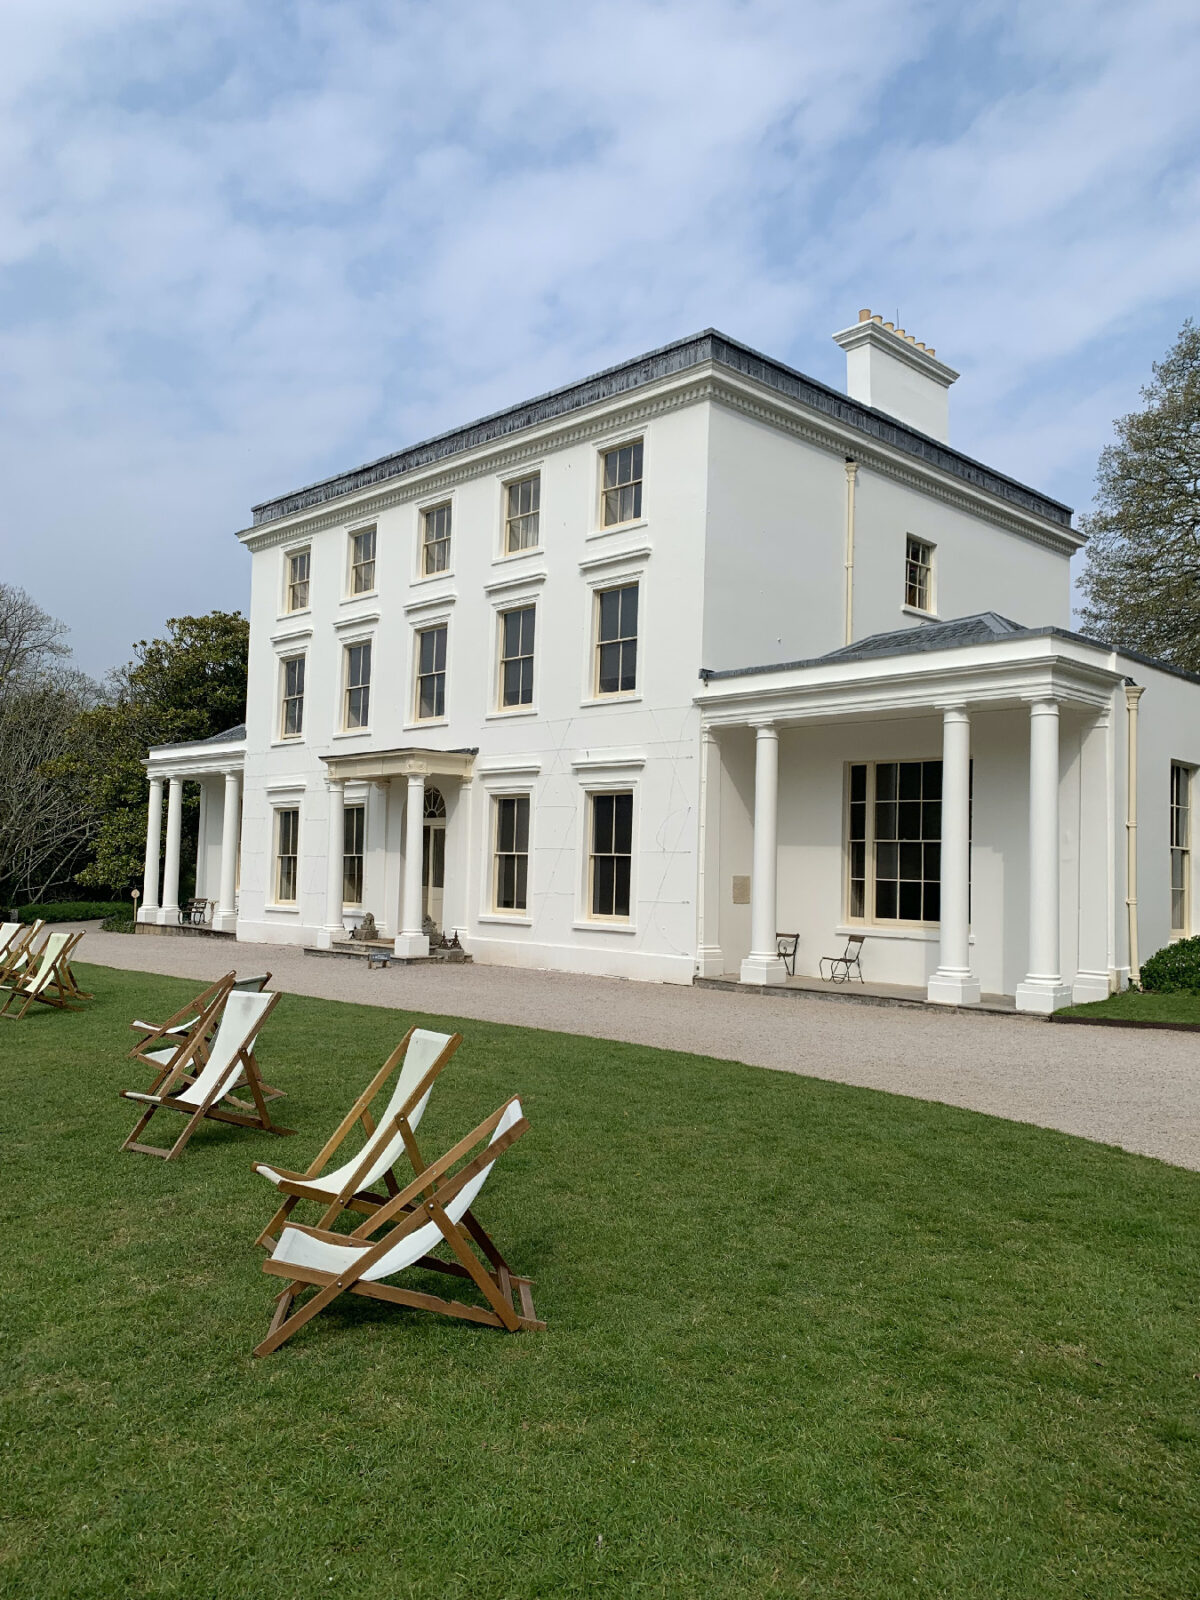 Waiting for guests and perhaps a round of croquet, the Regency-styled Greenway home of Agatha Christie on the south coast of England was a focal point for entertaining and writing widely read mysteries. (Courtesy of Carl H. Larsen) 